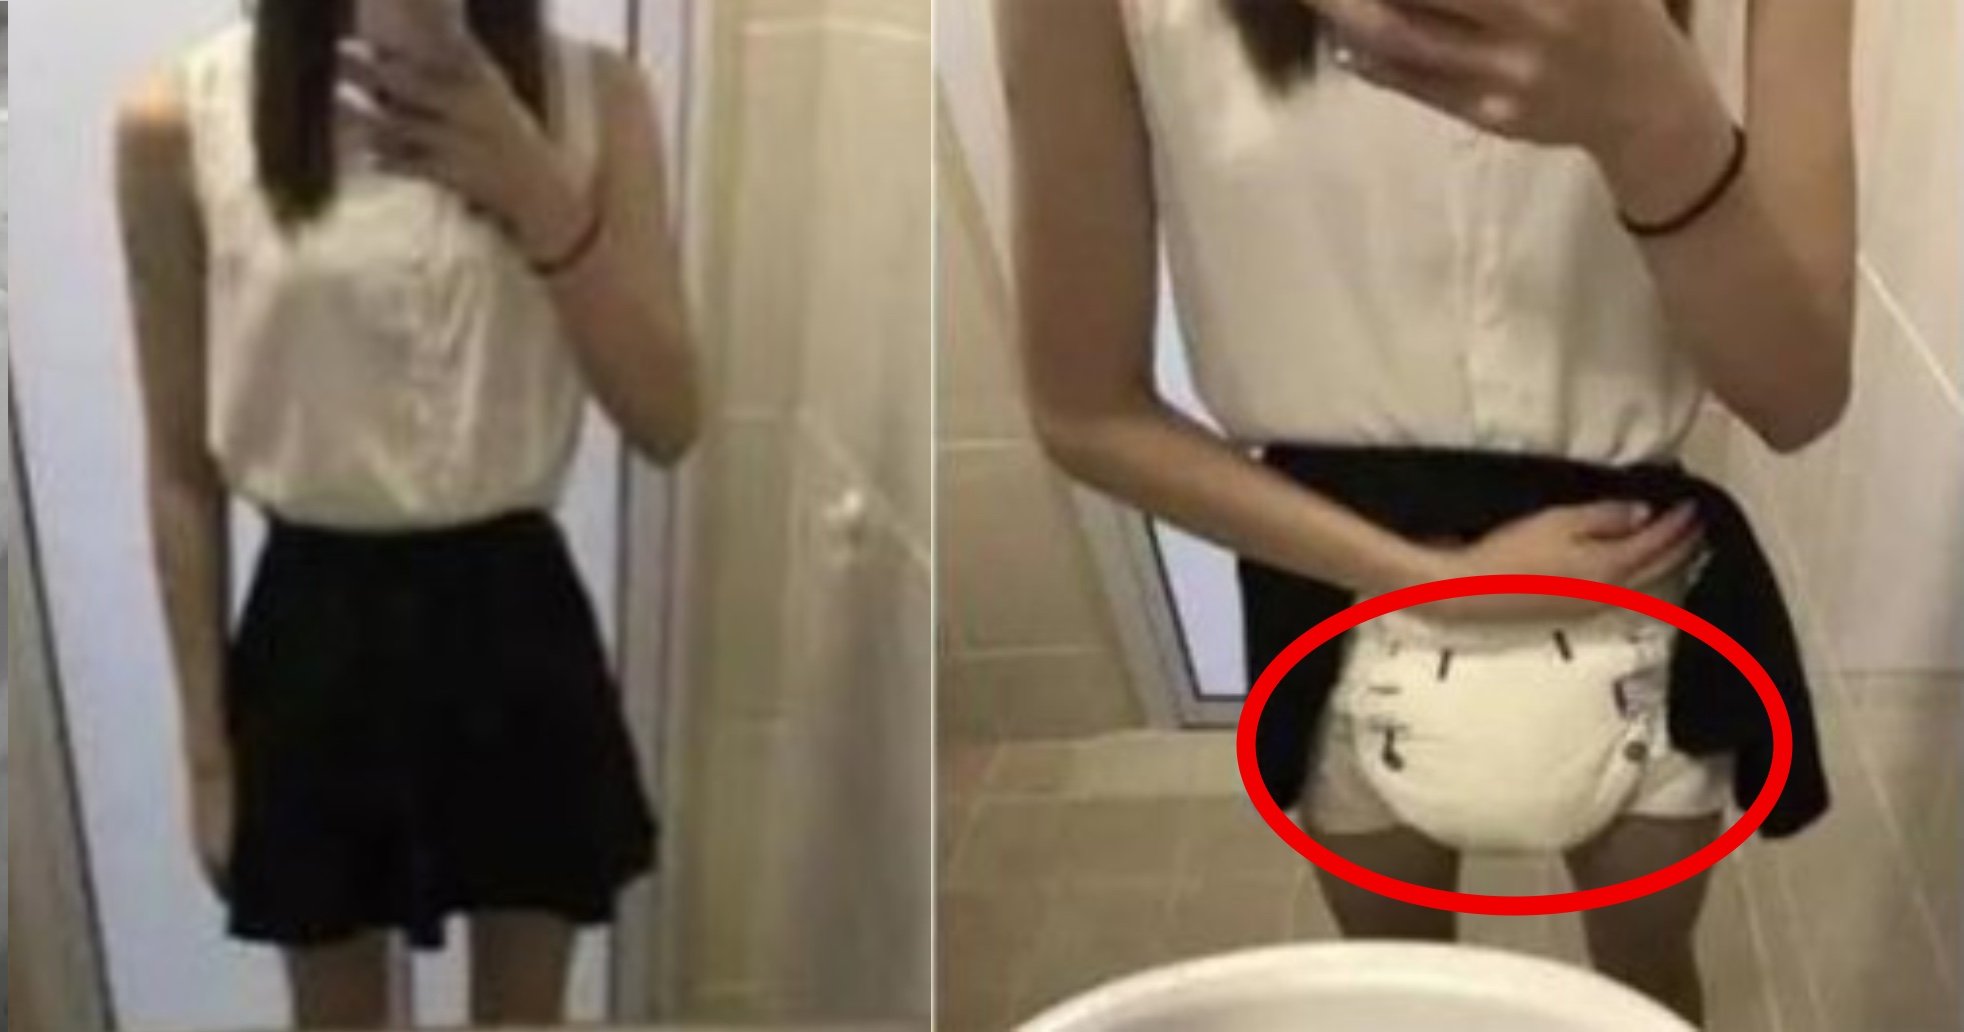 diaper.jpg?resize=412,275 - 19-Year-Old Girl Who Has To Wear A Diaper Every Day Shares Her Story Of Regret